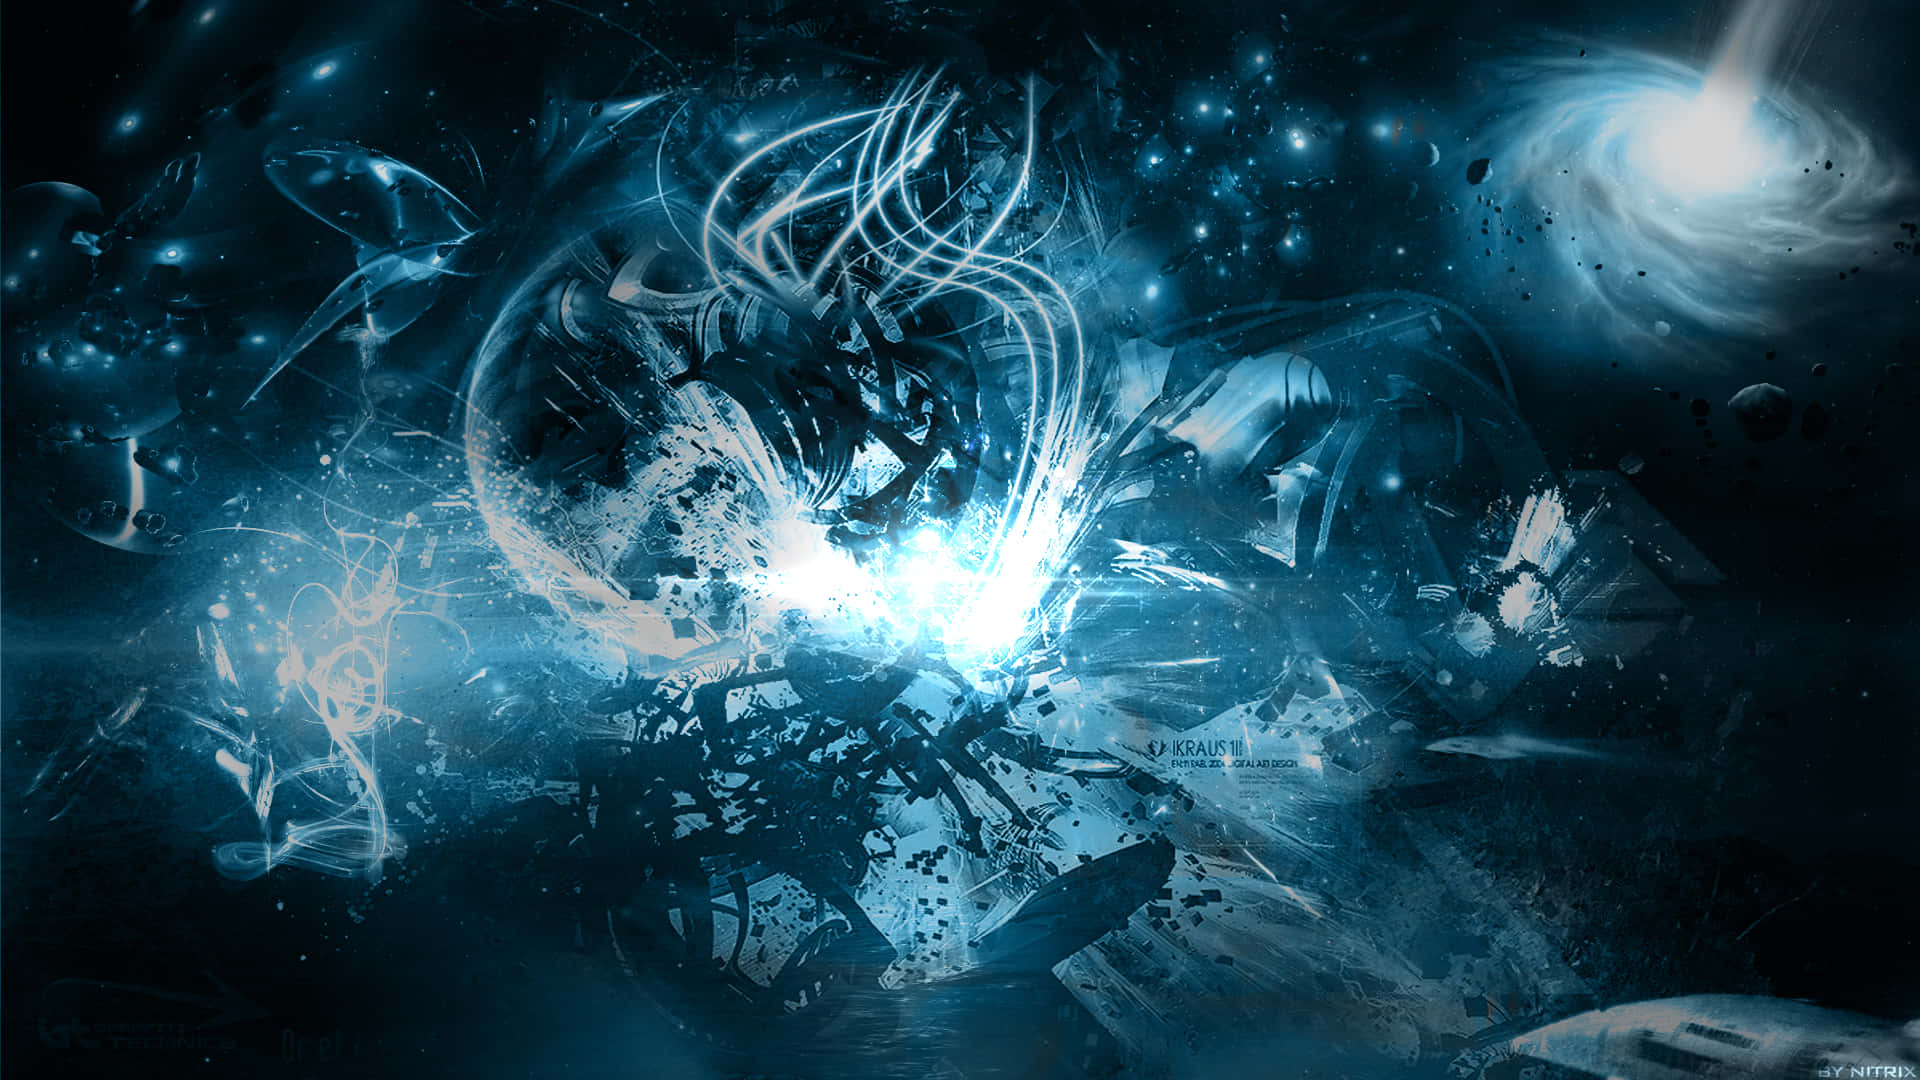 A Blue And White Image Of A Spaceship Background